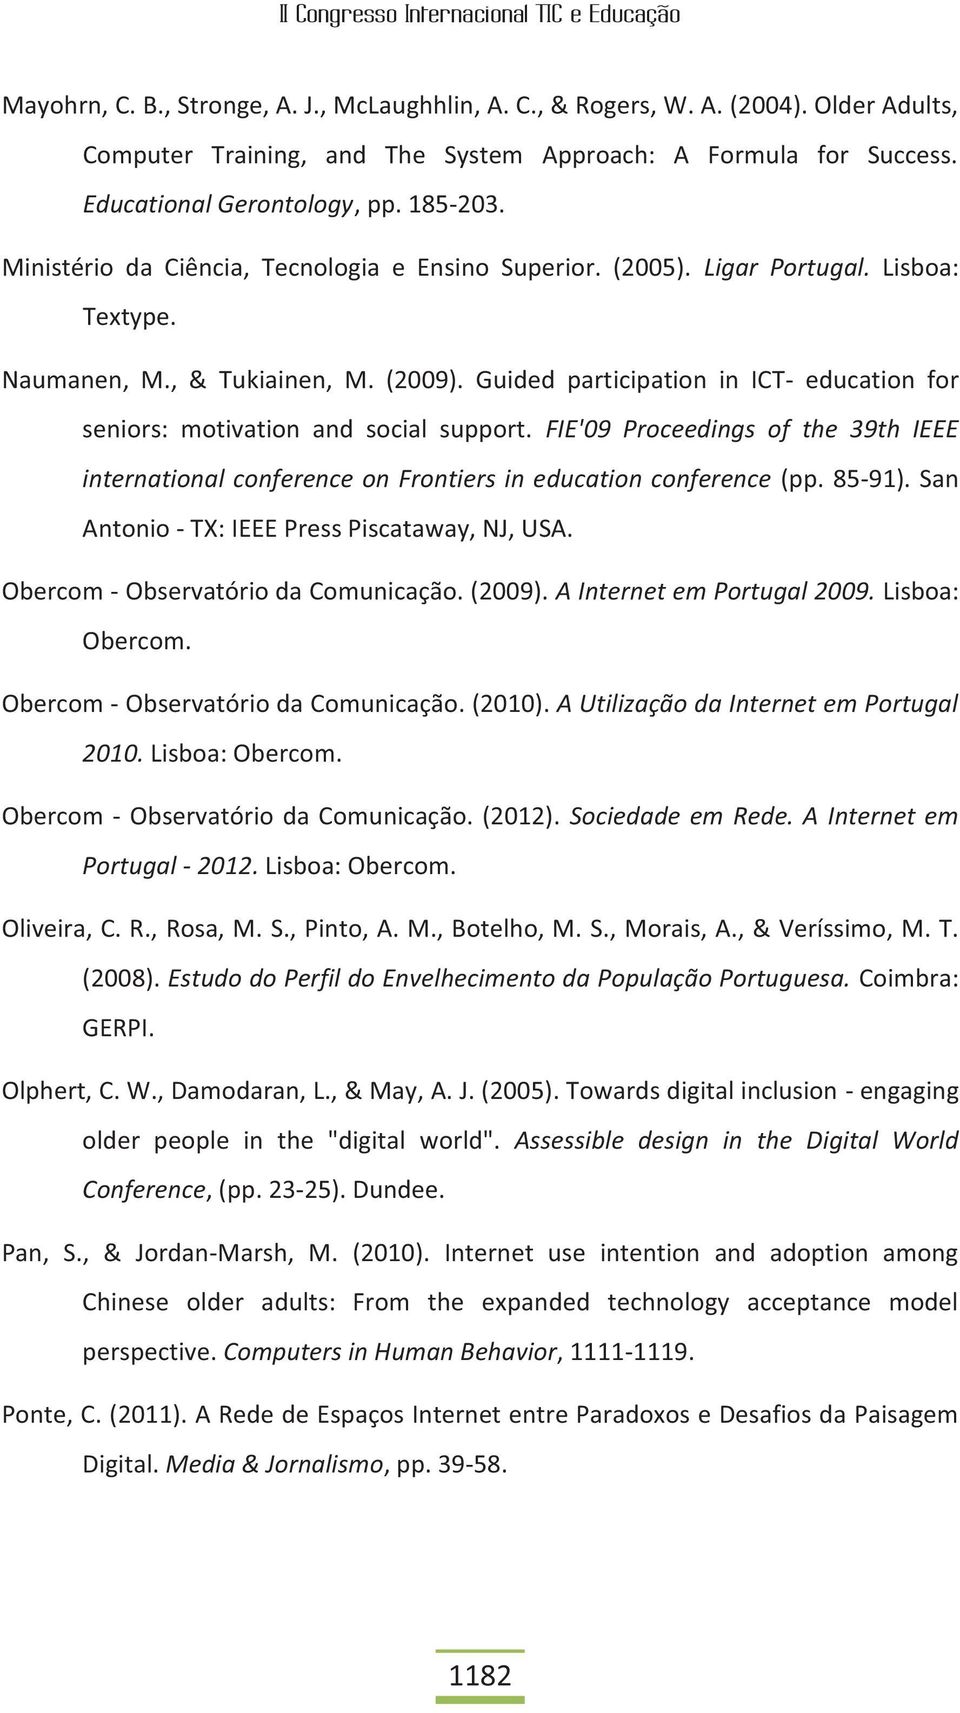 Guided participation in ICT- education for seniors: motivation and social support. FIE'09 Proceedings of the 39th IEEE international conference on Frontiers in education conference (pp. 85-91).